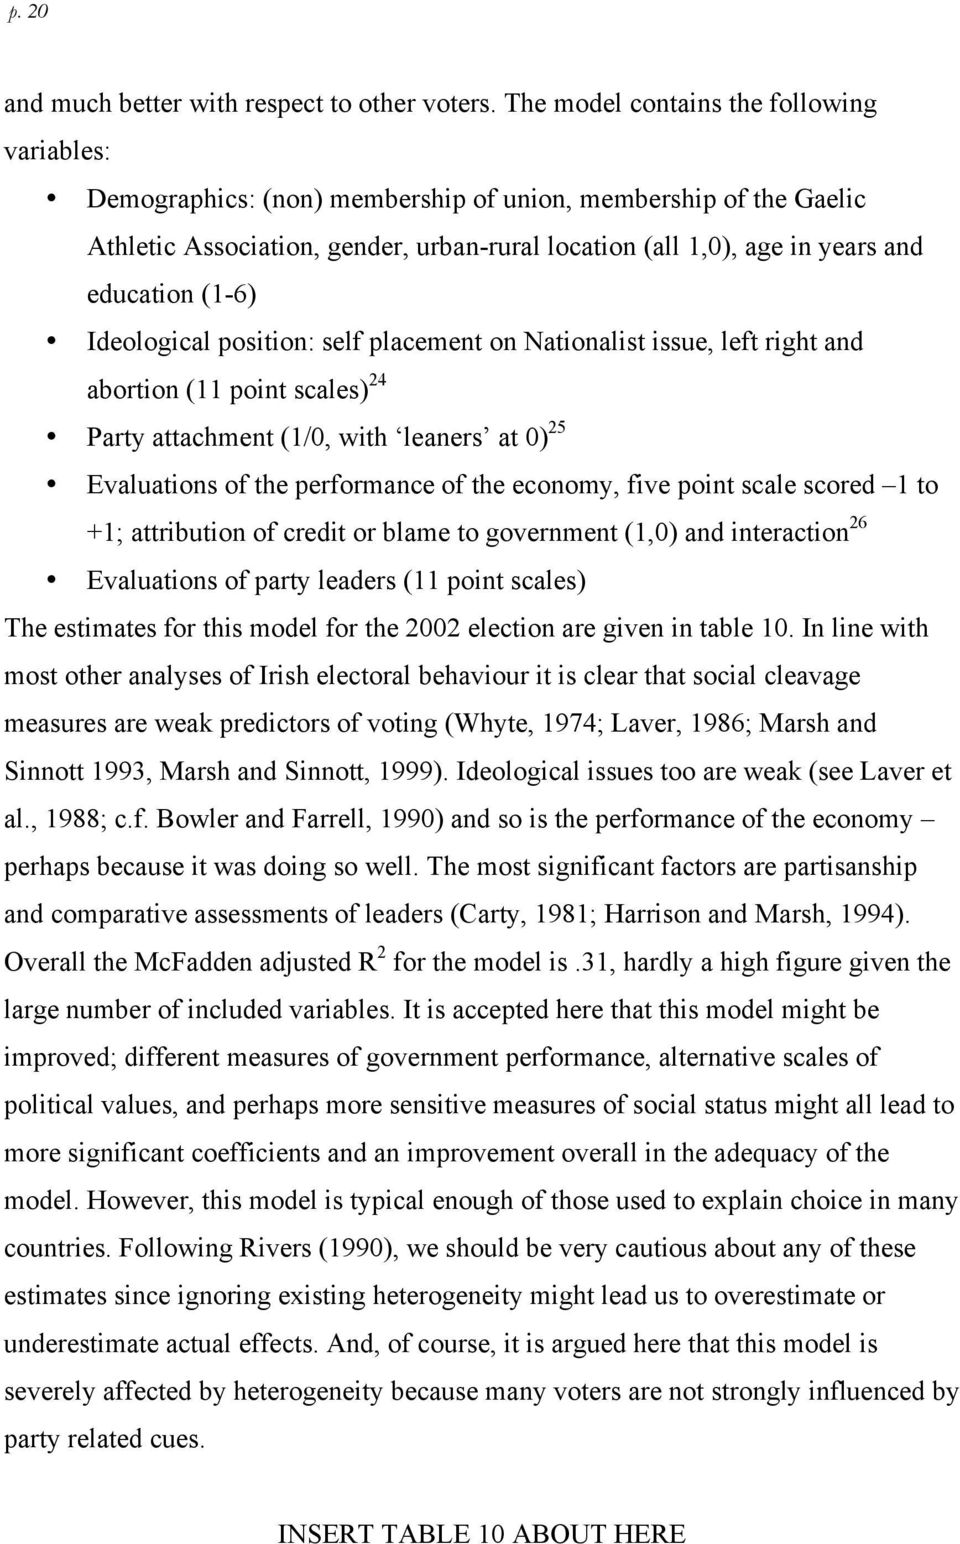 (1-6) Ideological position: self placement on Nationalist issue, left right and abortion (11 point scales) 24 Party attachment (1/0, with leaners at 0) 25 Evaluations of the performance of the